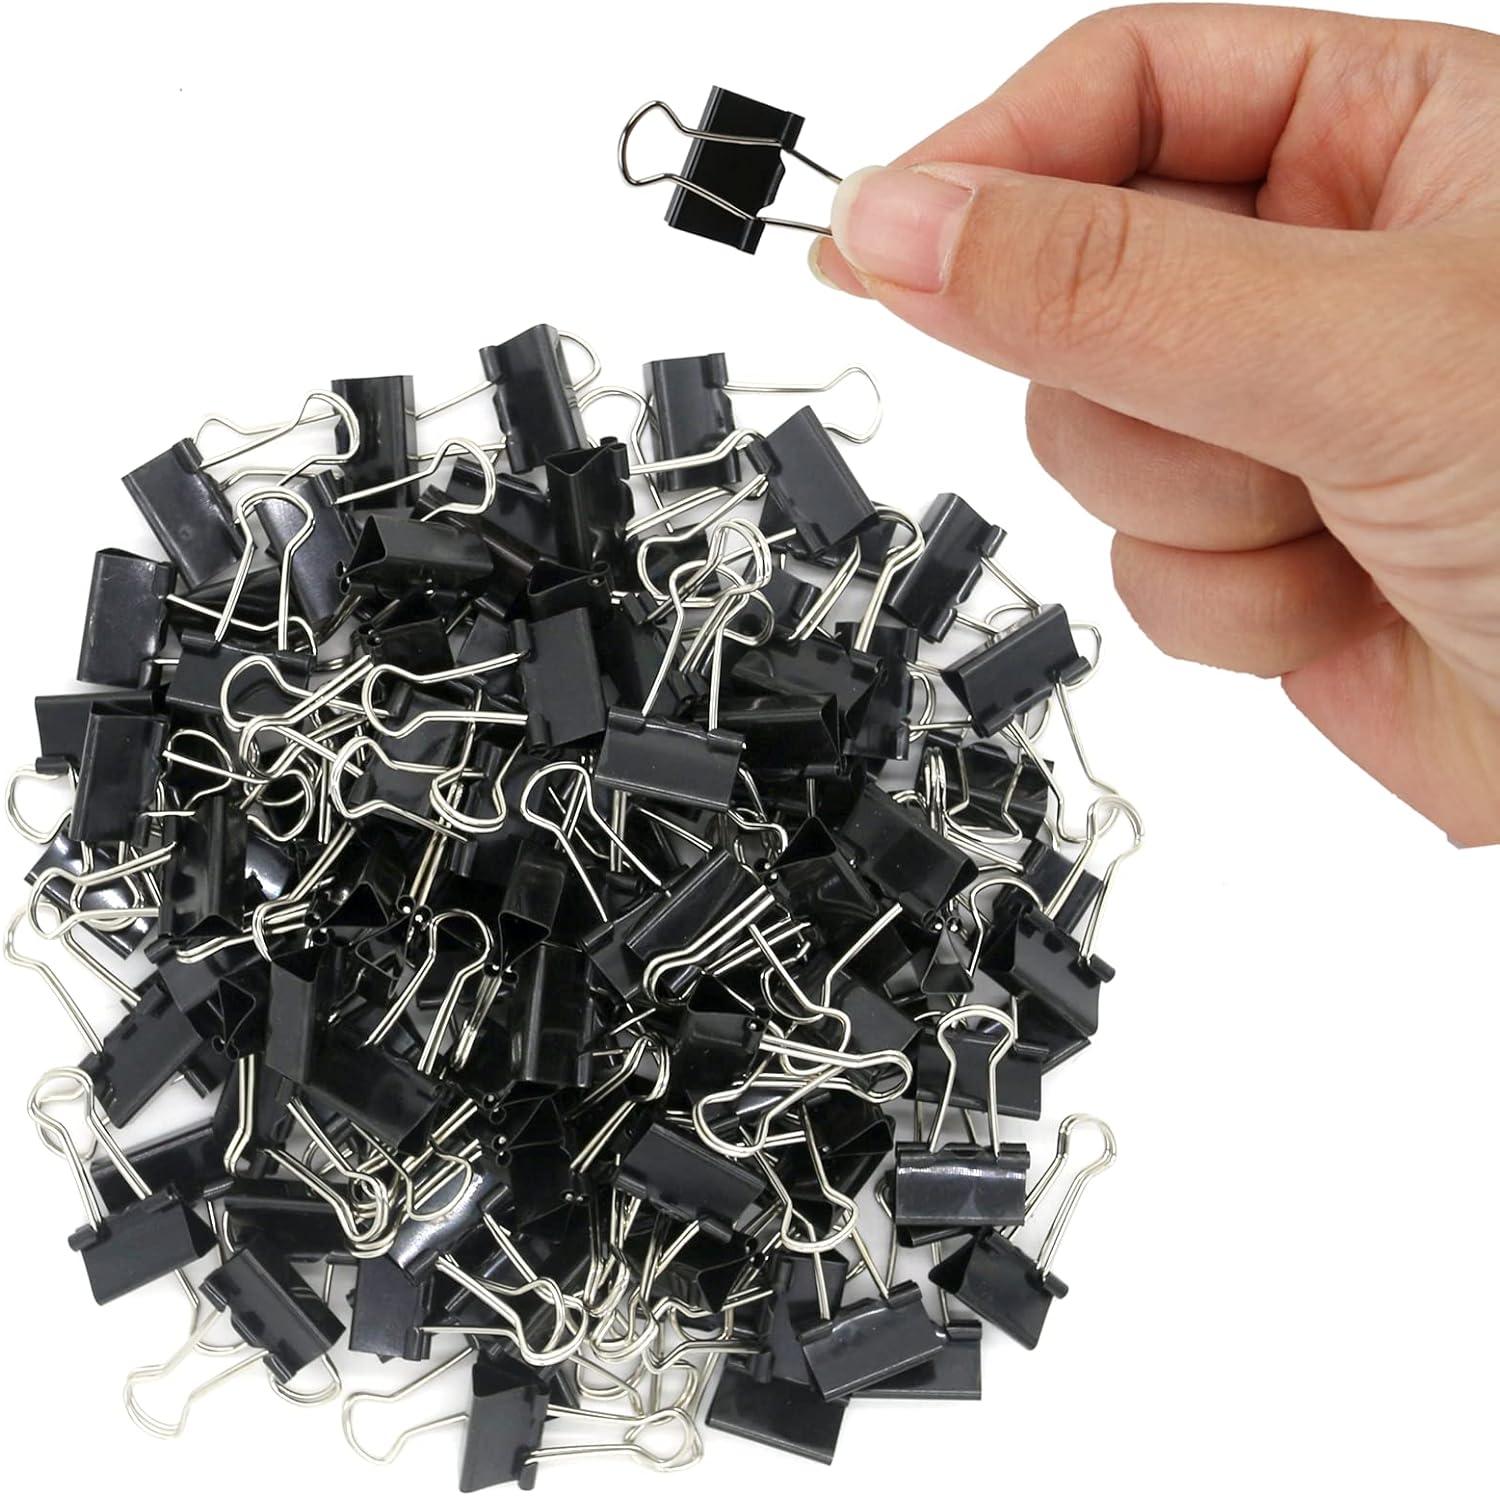 OWLKELA 120 Pack Mini Binder Clips Black Binder Clips Small Paper Clips 15mm 5/8 Inch Micro Size Office Clips For Home School Office And Business